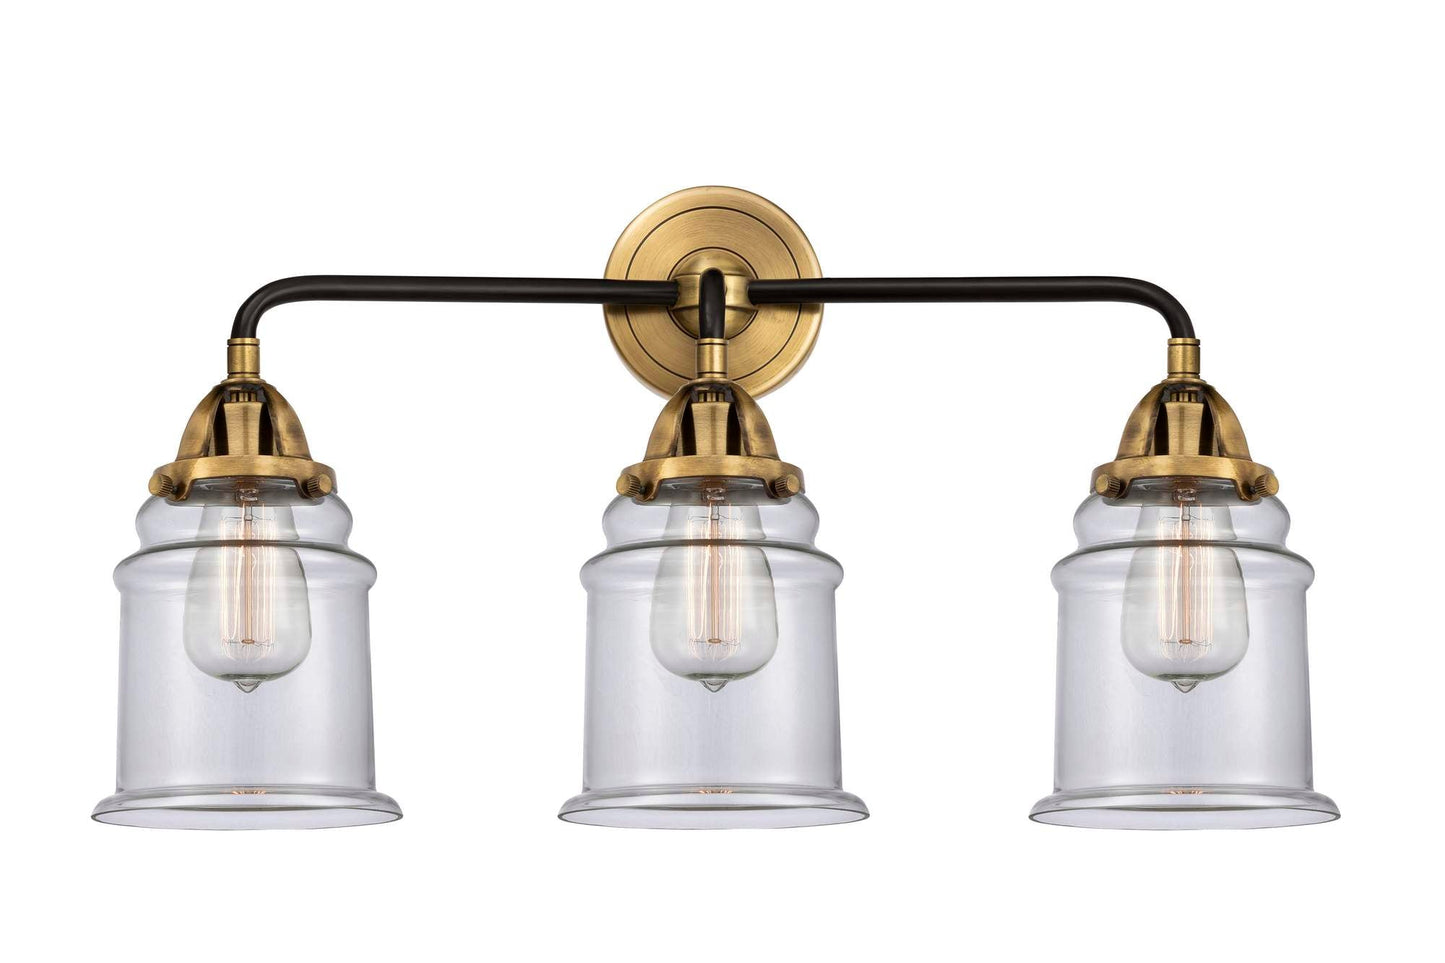 3-Light 24" Black Antique Brass Bath Vanity Light - Clear Canton Glass - Choice of Finish And Incandesent Or LED Bulbs